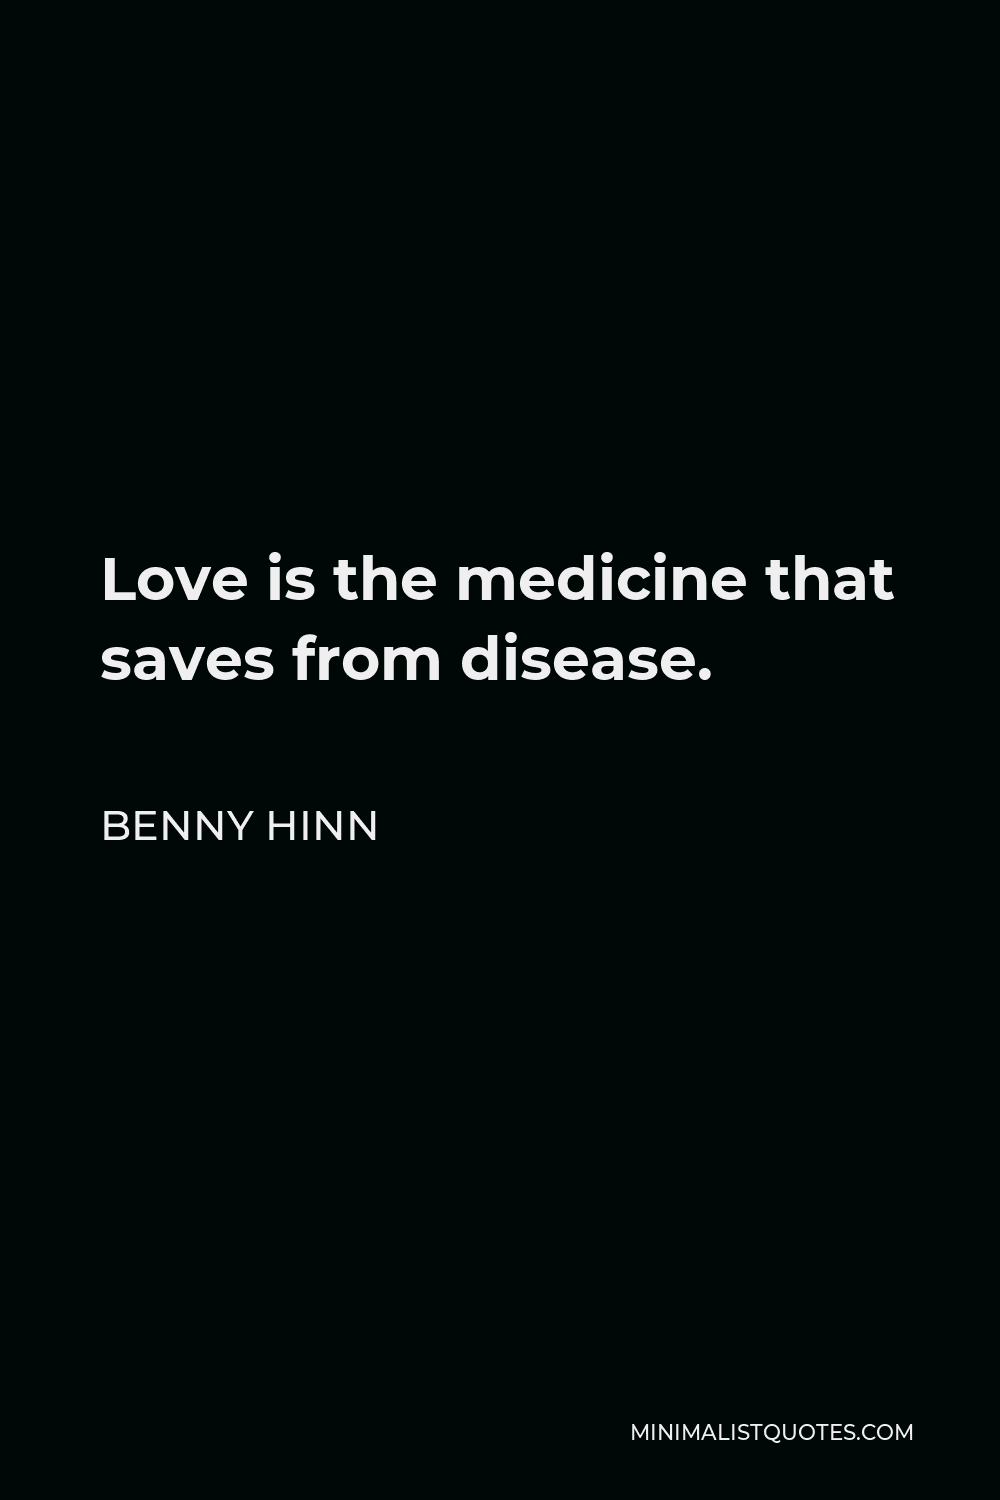 Benny Hinn Quote - Love is the medicine that saves from disease.